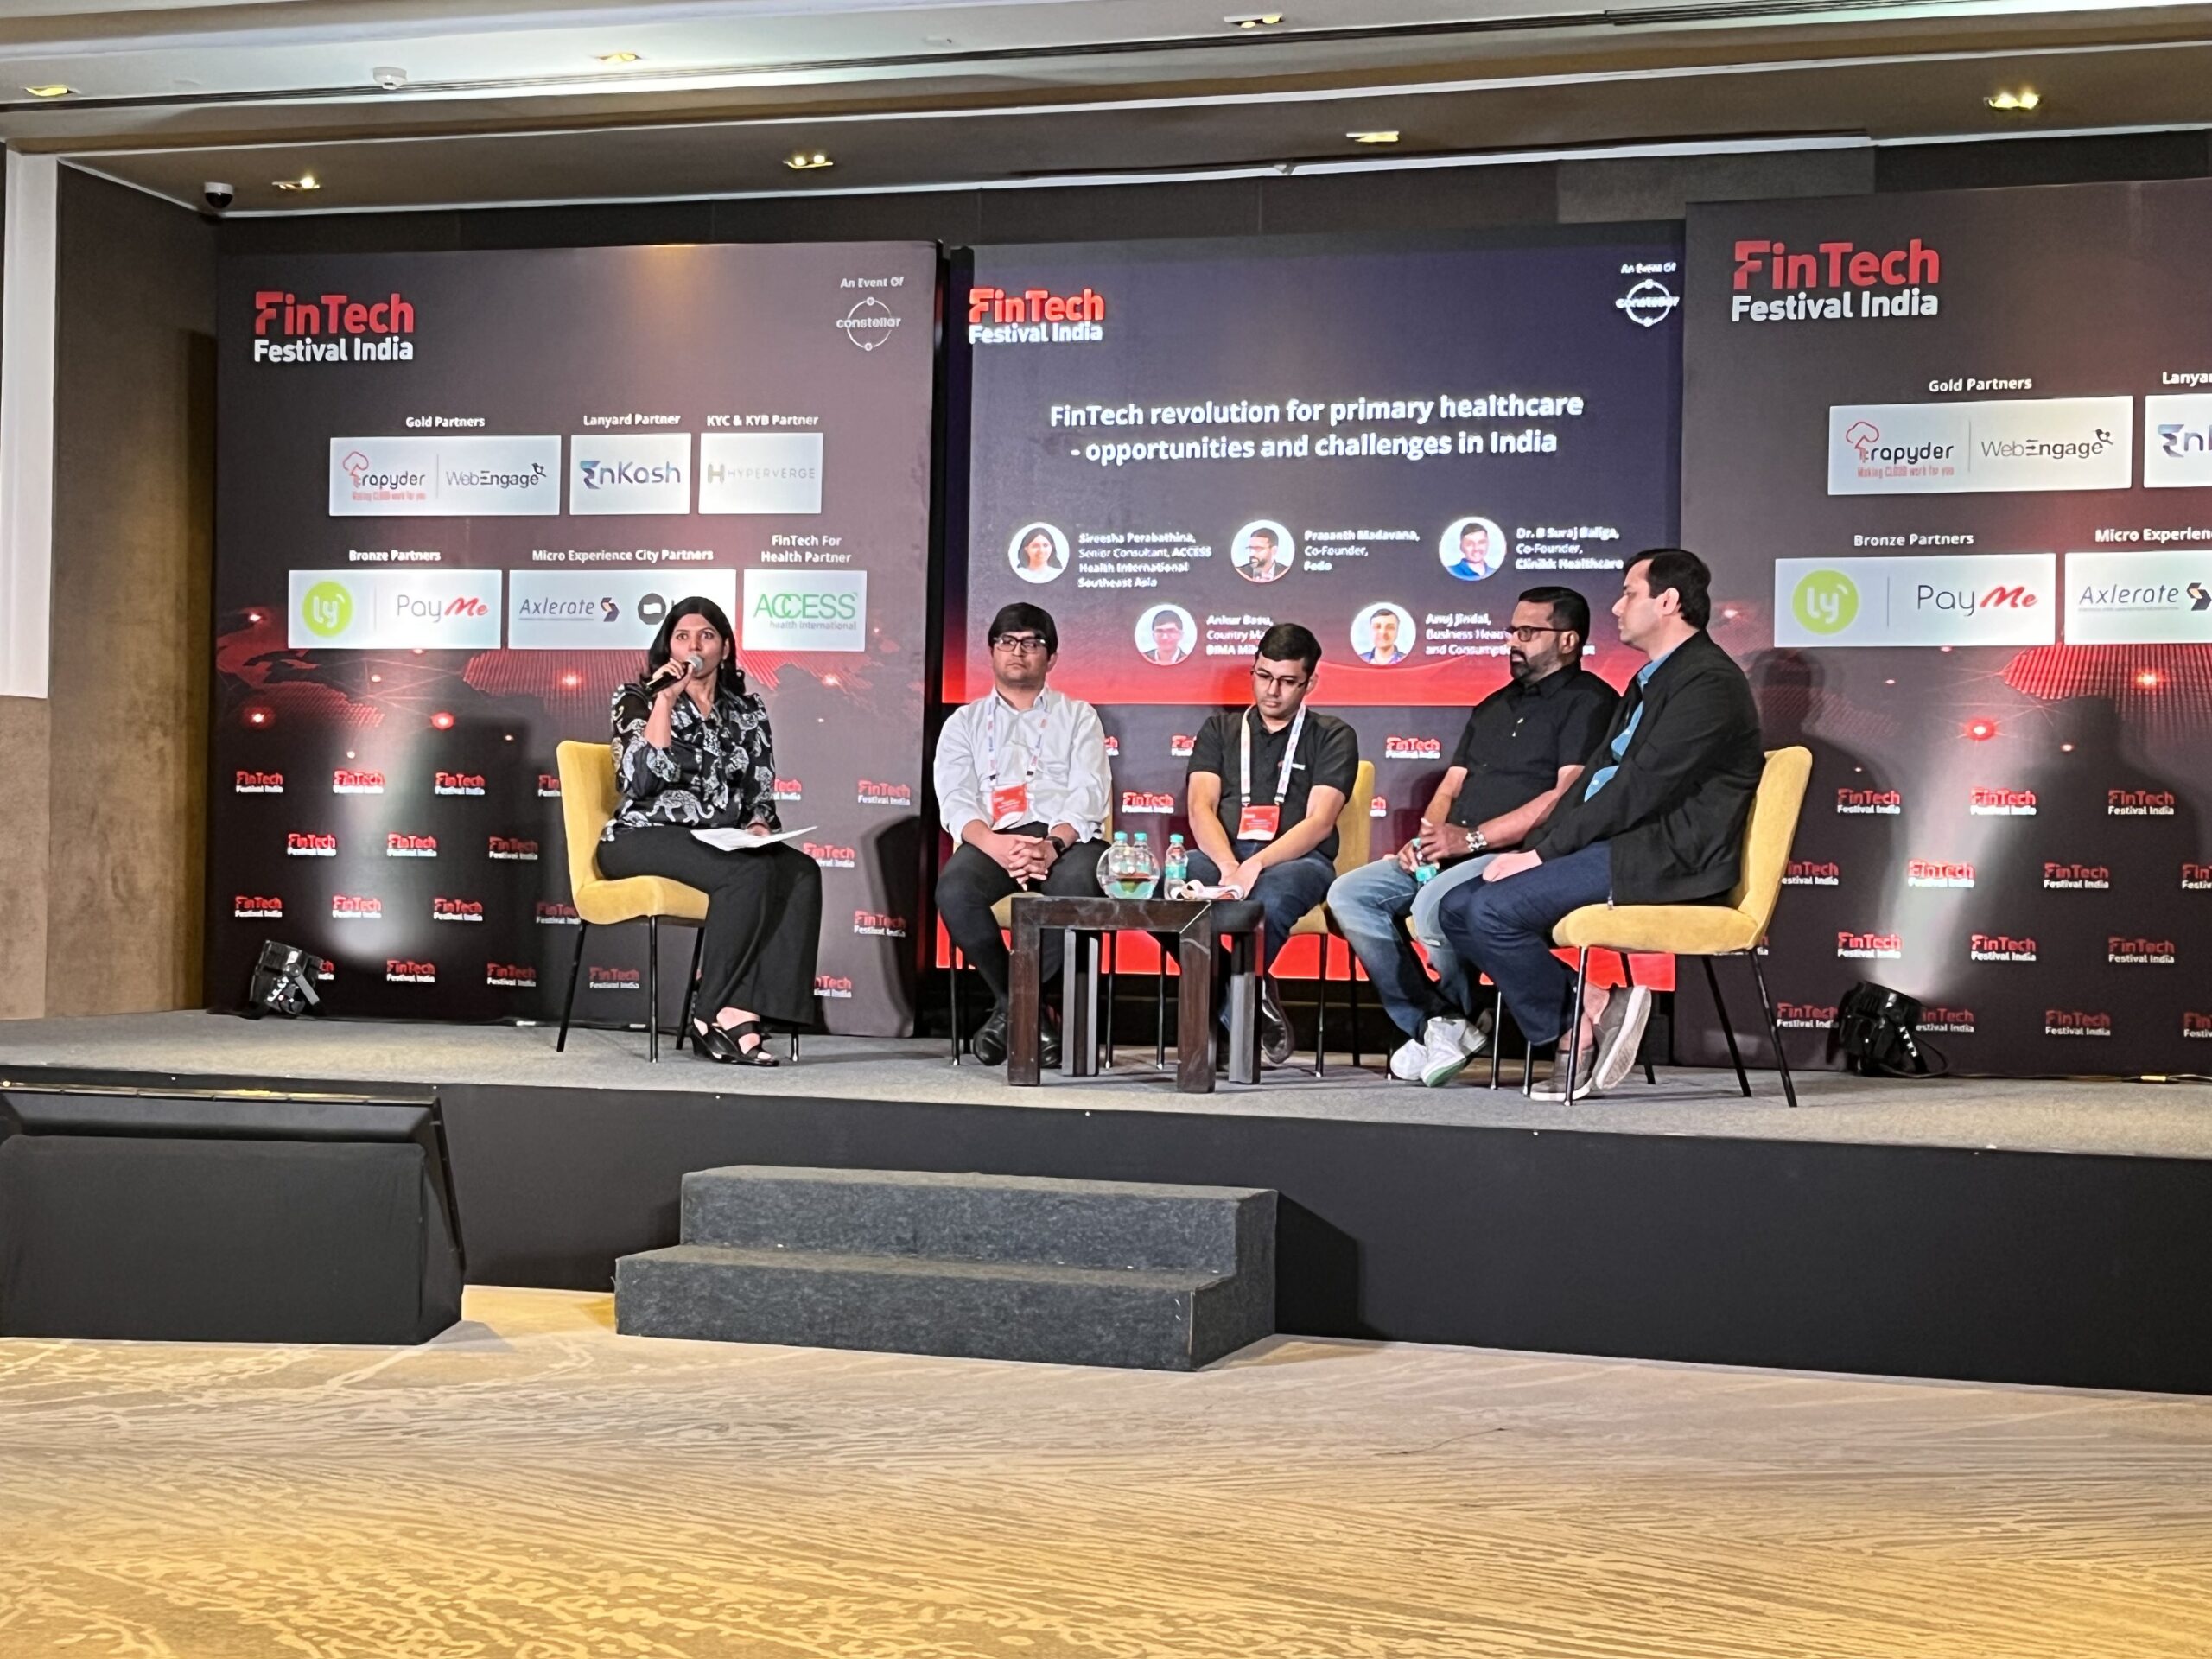 Fintech Festival India: Microexperience on Fintech for Health in Bangalore